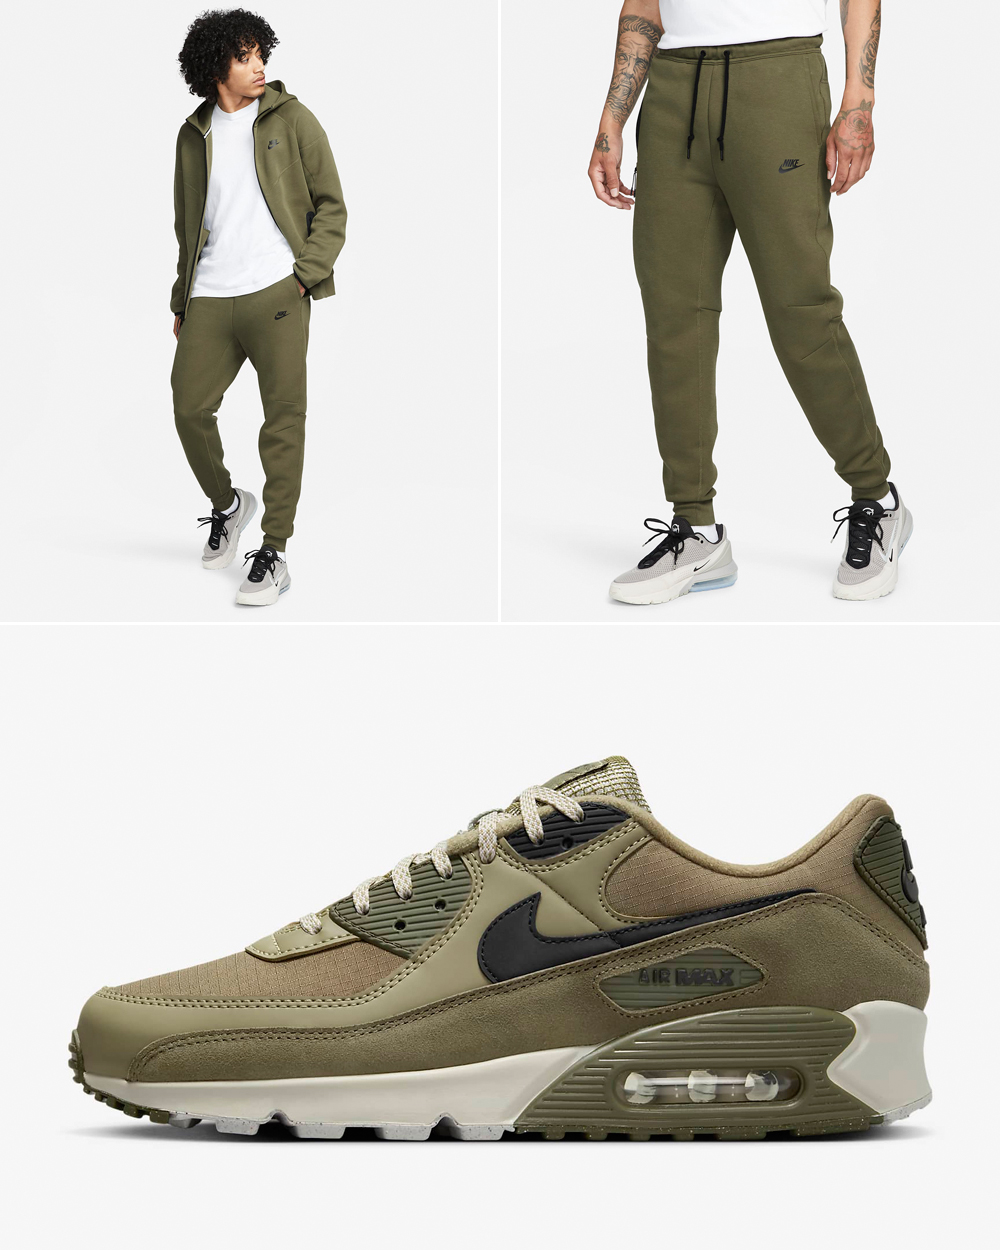 Nike-Air-Max-90-Medium-Olive-Tech-Fleece-Hoodie-Jogger-Pants-Outfit